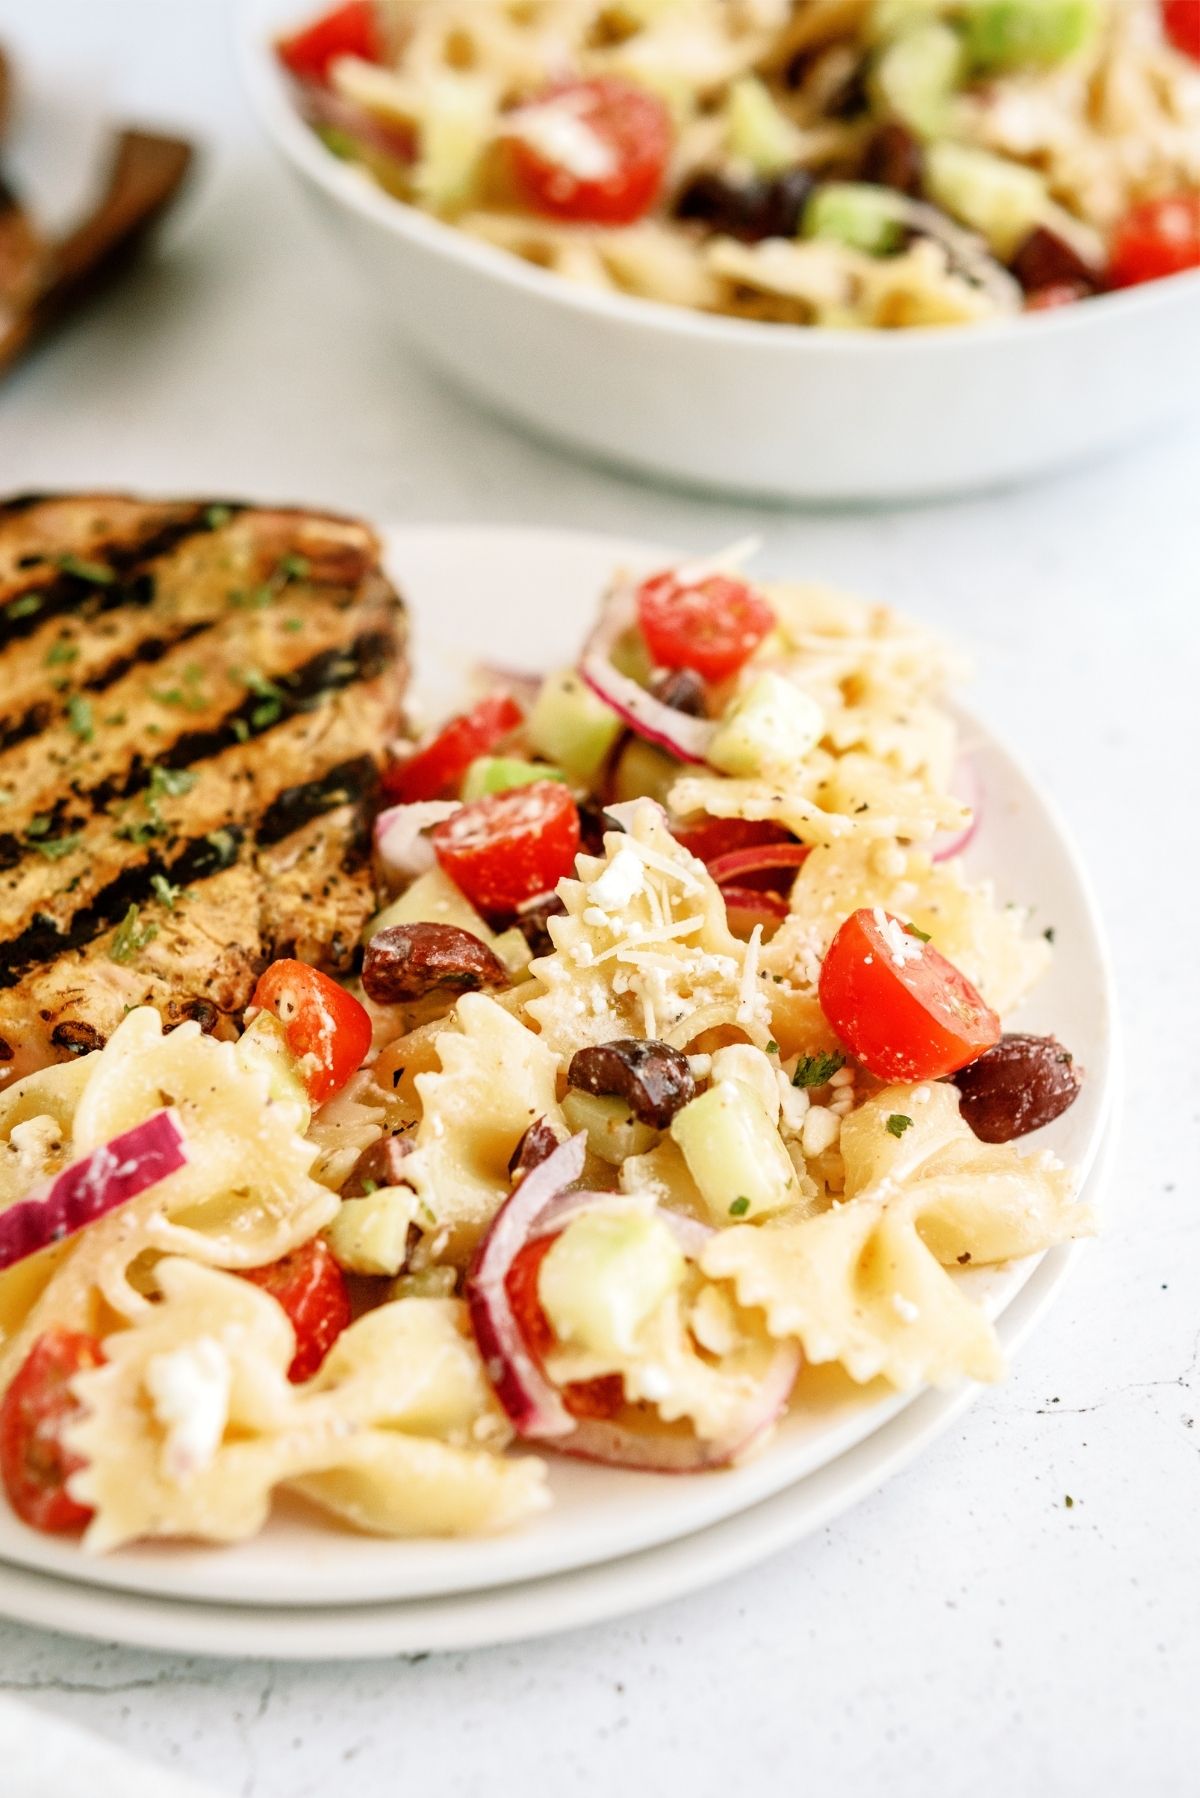 A serving of Greek Pasta Salad on a plate with grilled chicken